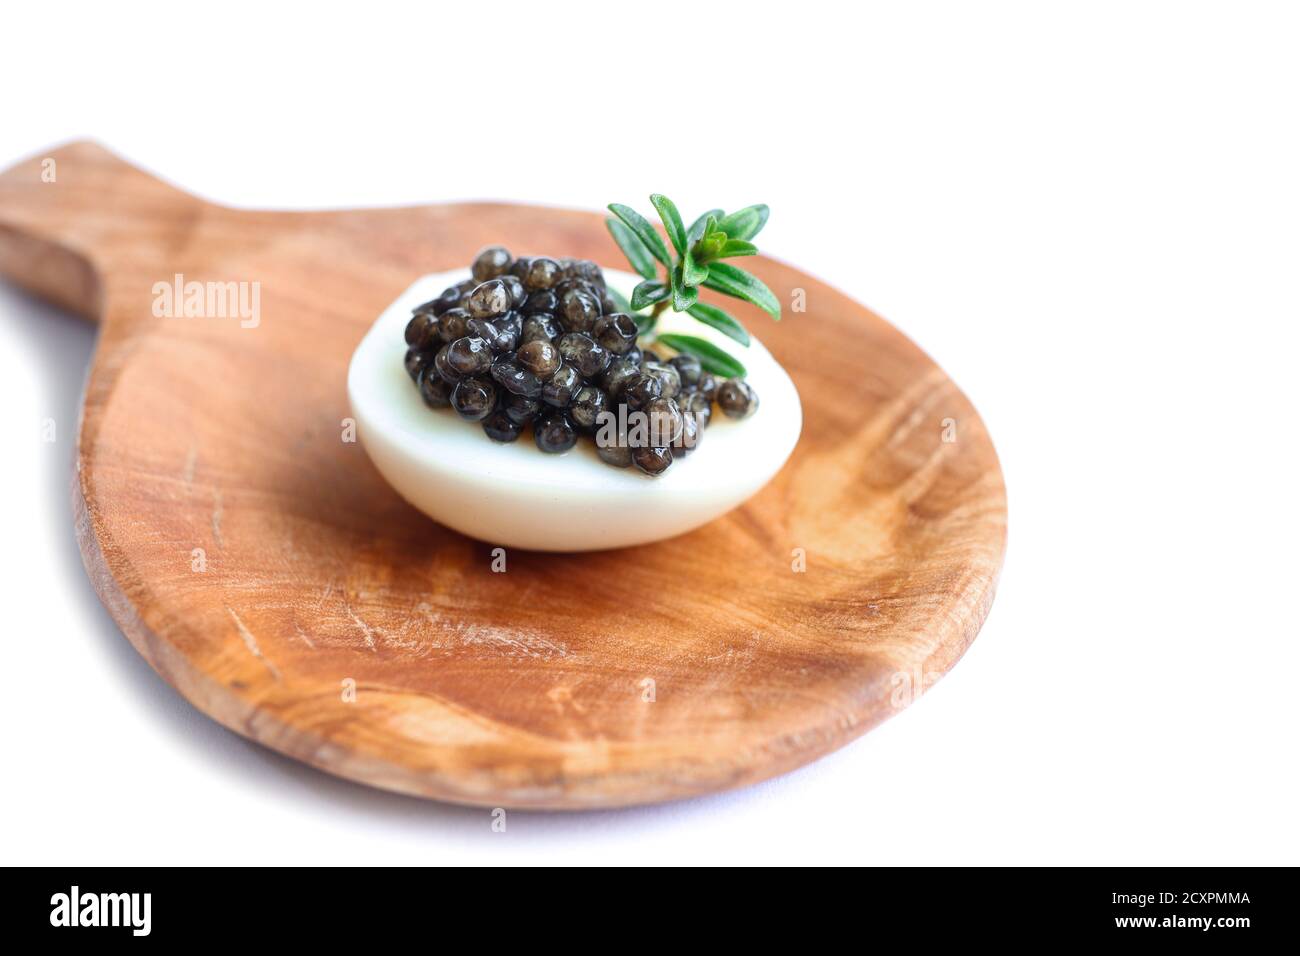 Gourmet dish, delicious black sturgeon caviar on a quail egg with rosemary on the wooden plate isolated on the white background Stock Photo